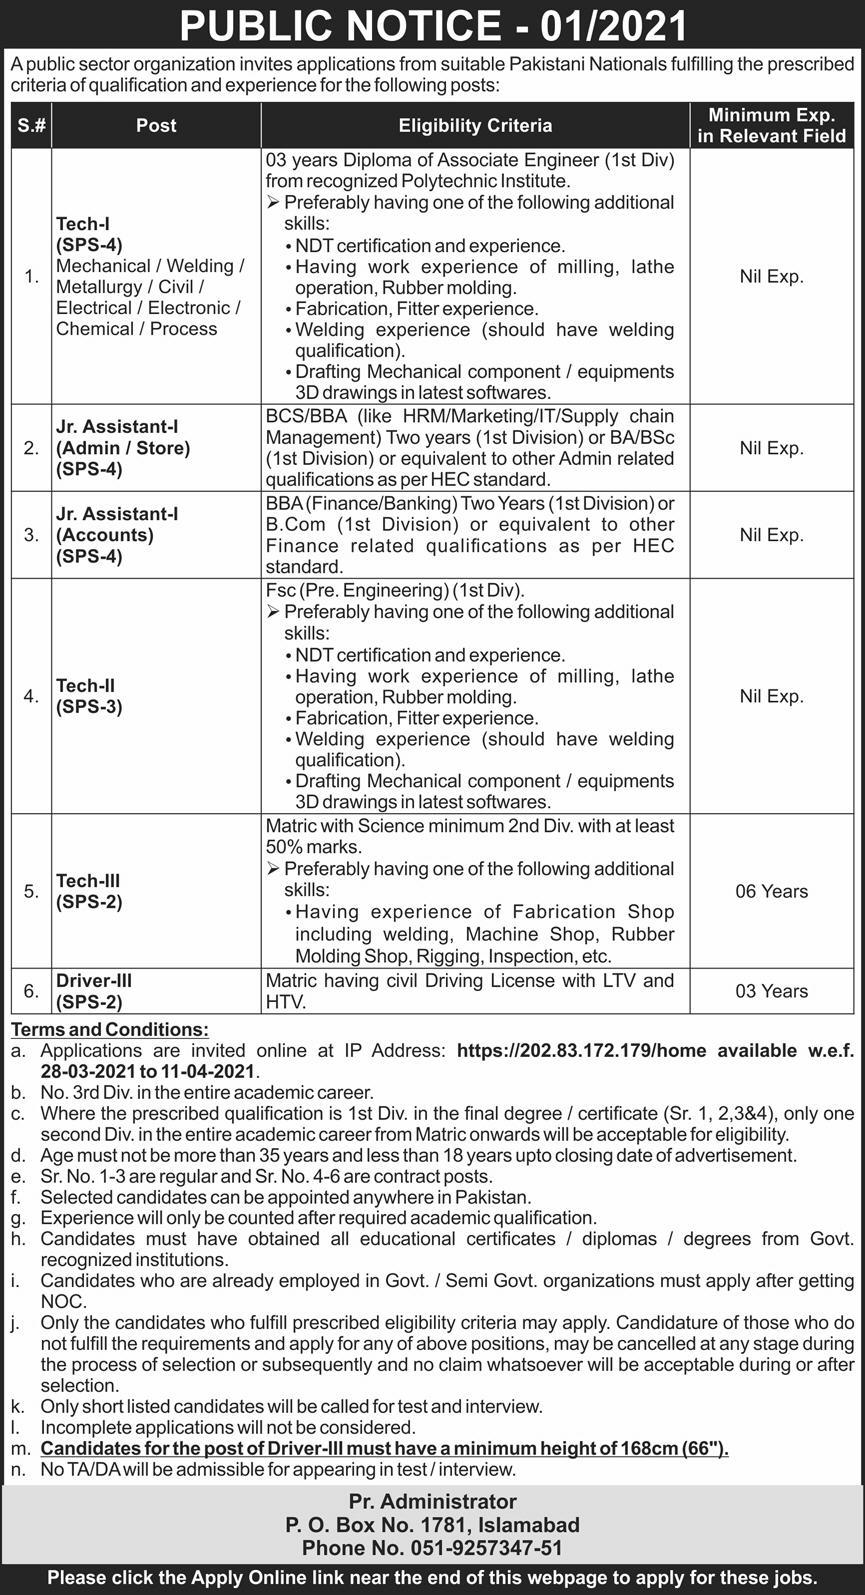 PO Box 1781 Islamabad Jobs 2021 March / April PAEC Apply Online Technicians & Others Latest